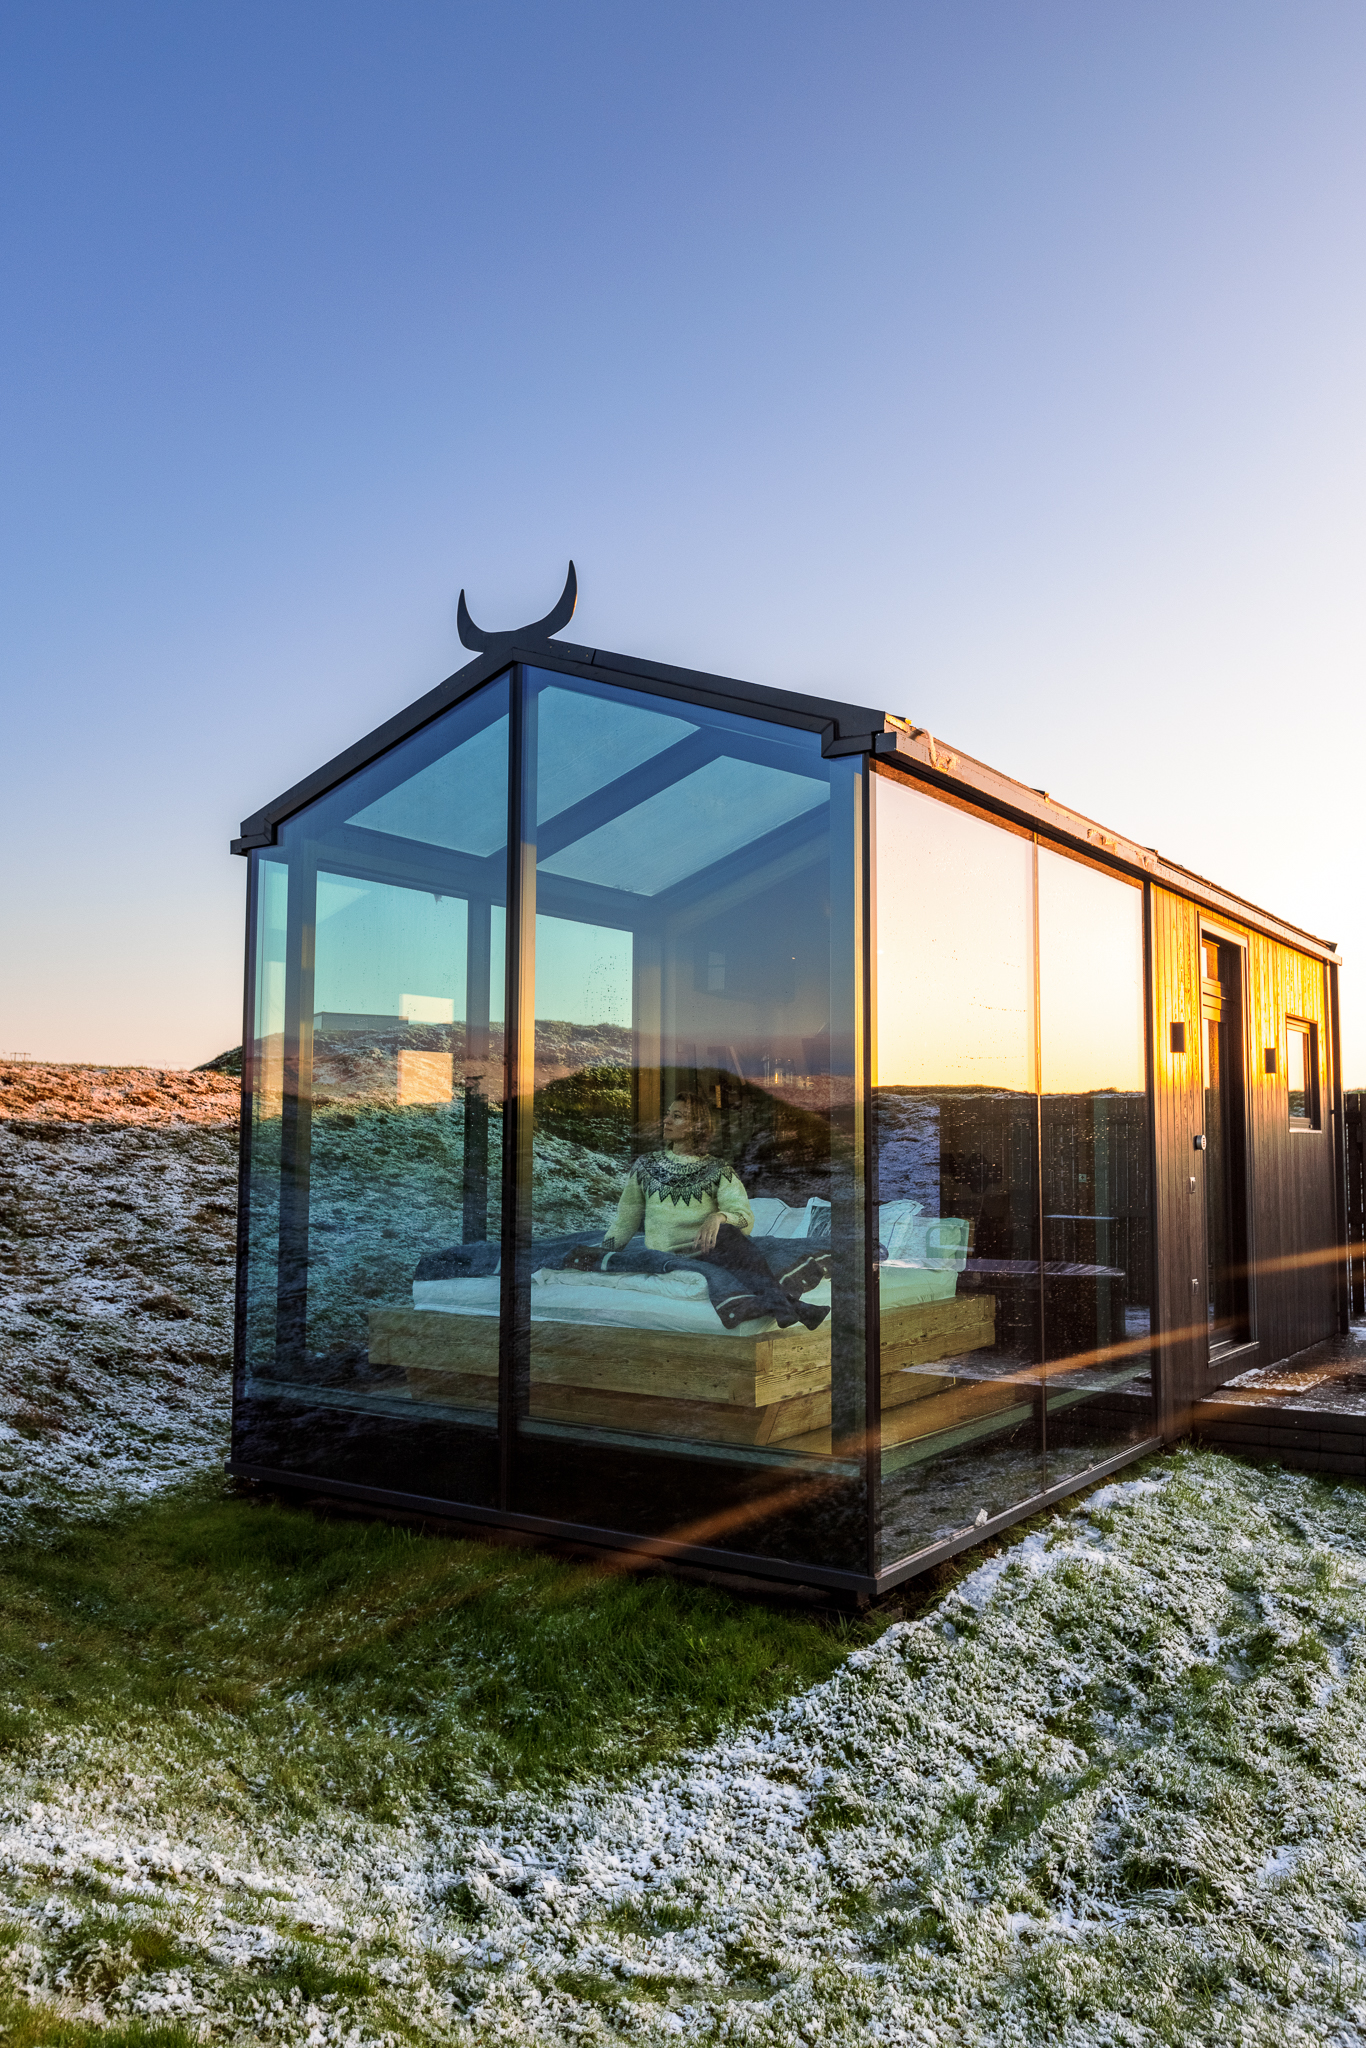 The outside of the Odin Panorama Glass Lodge in Iceland.